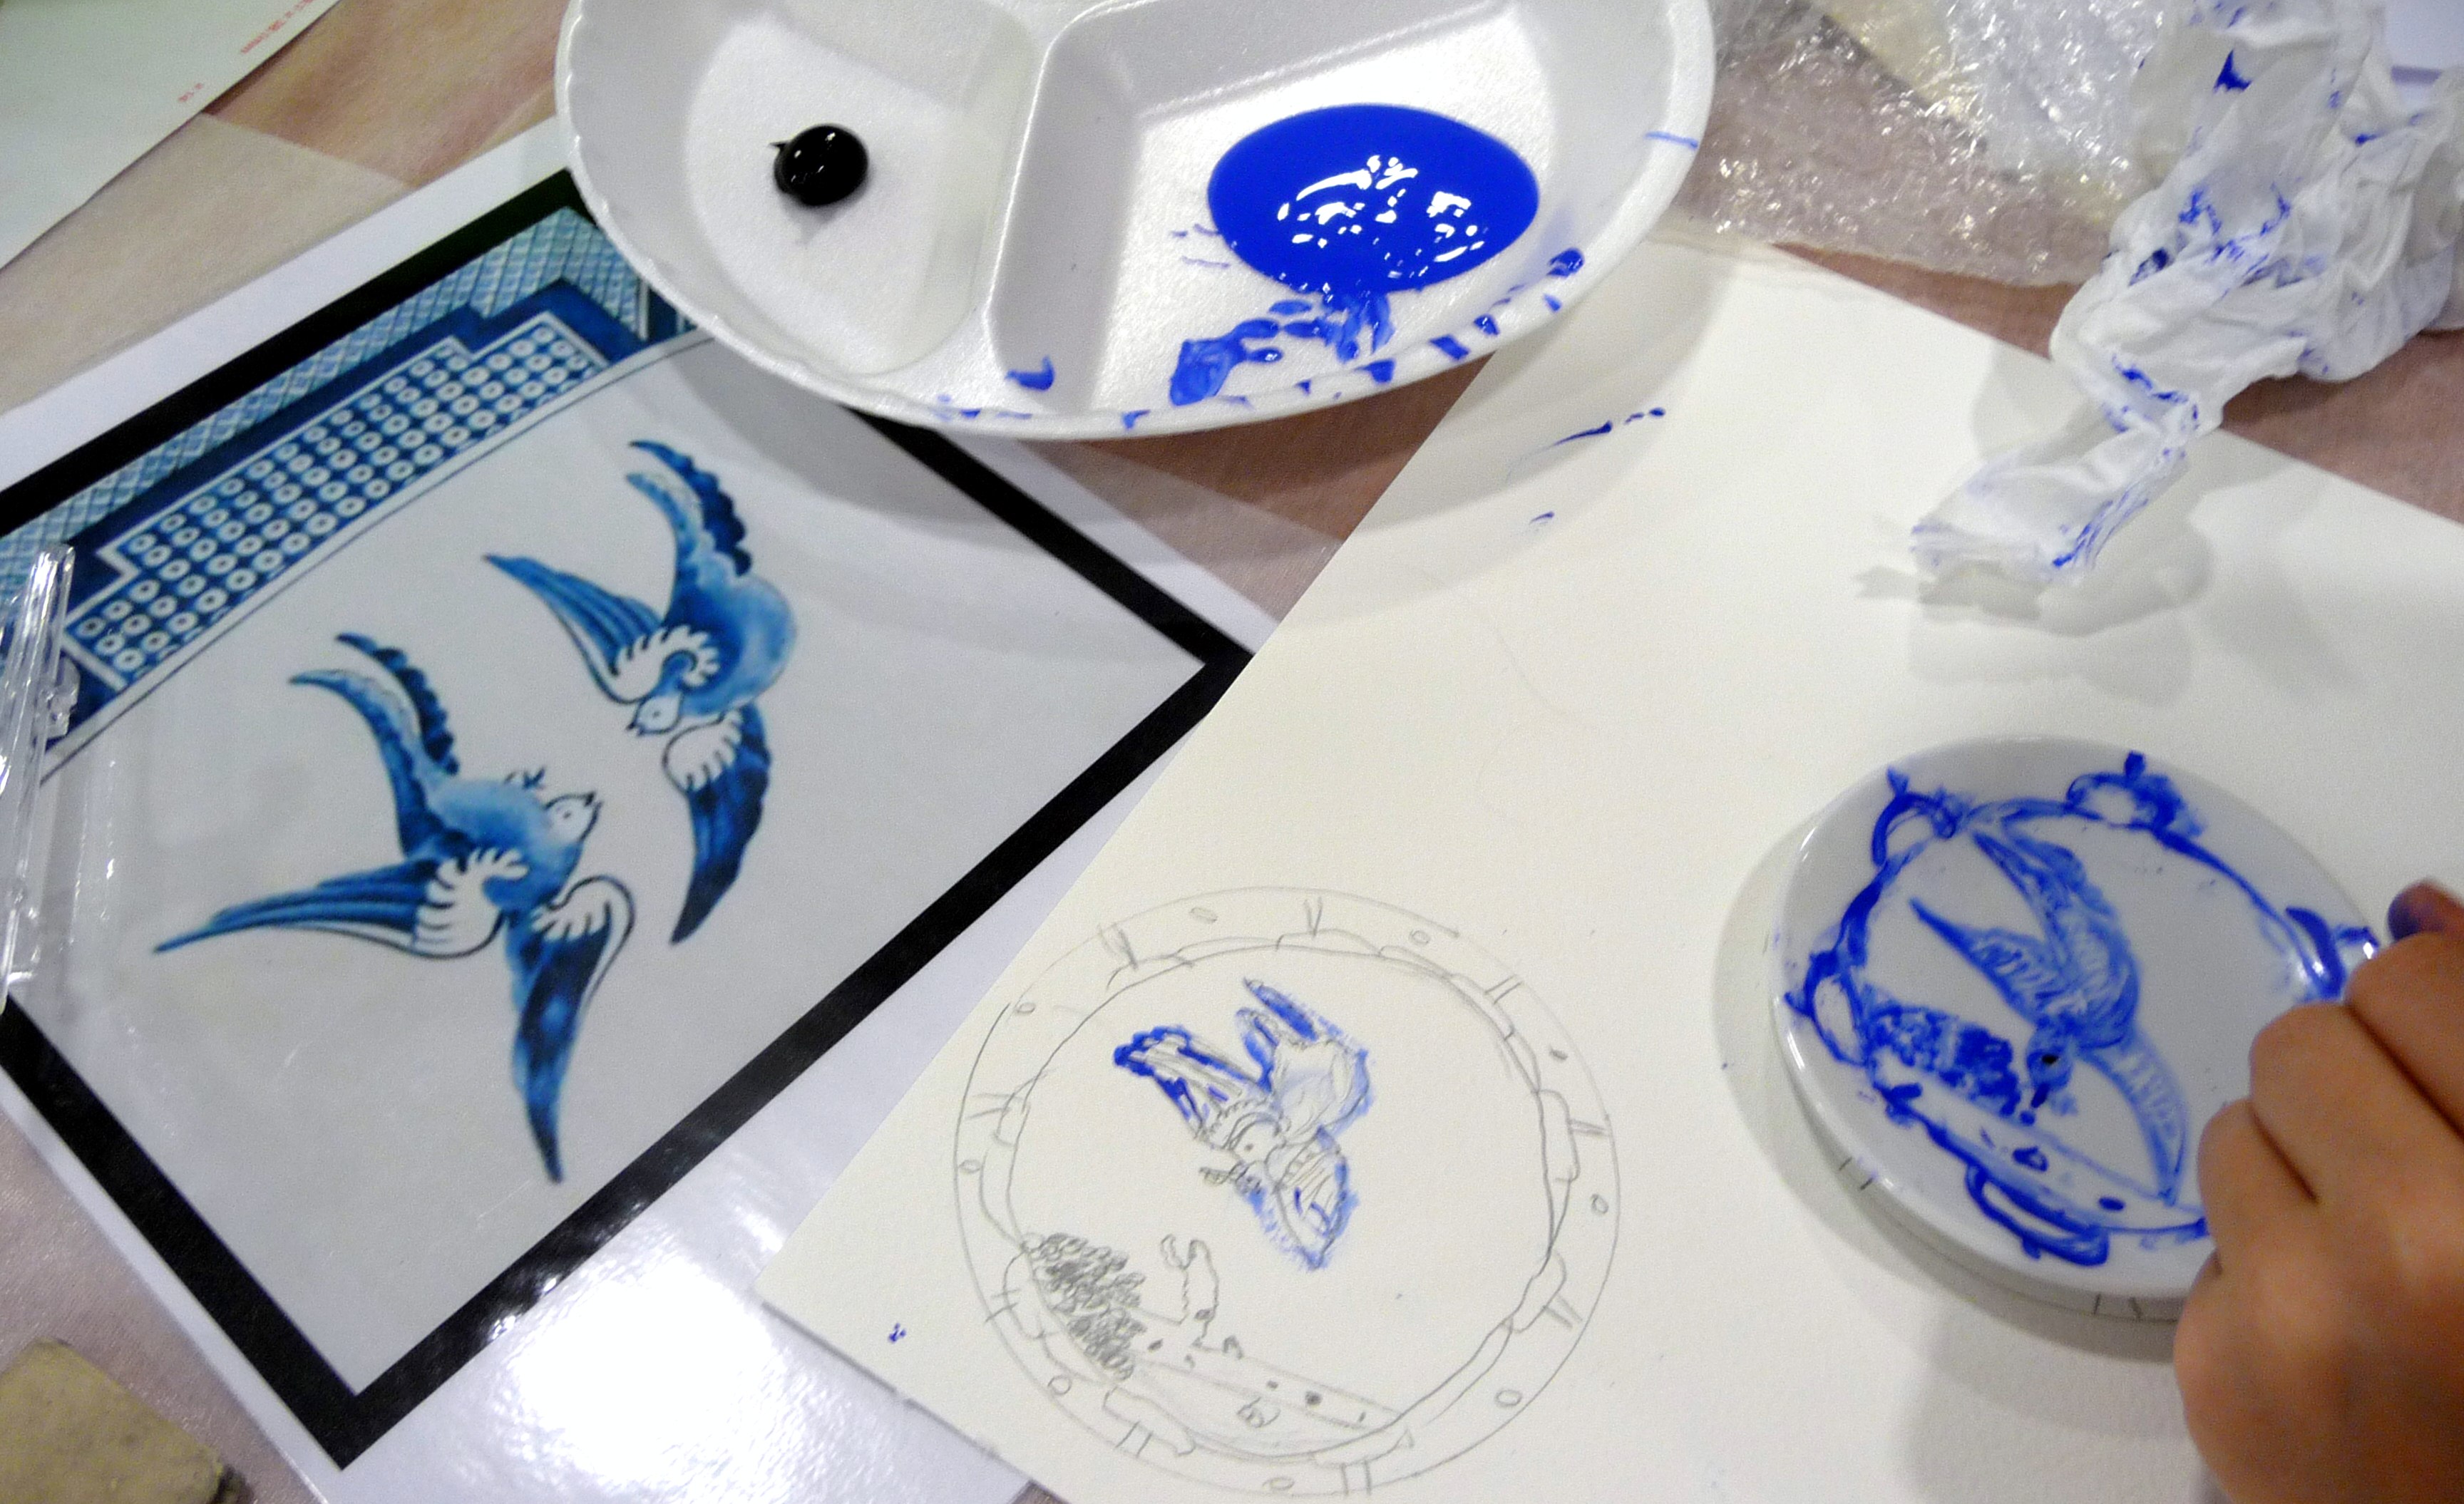 YE painted plates based on the willow pattern design